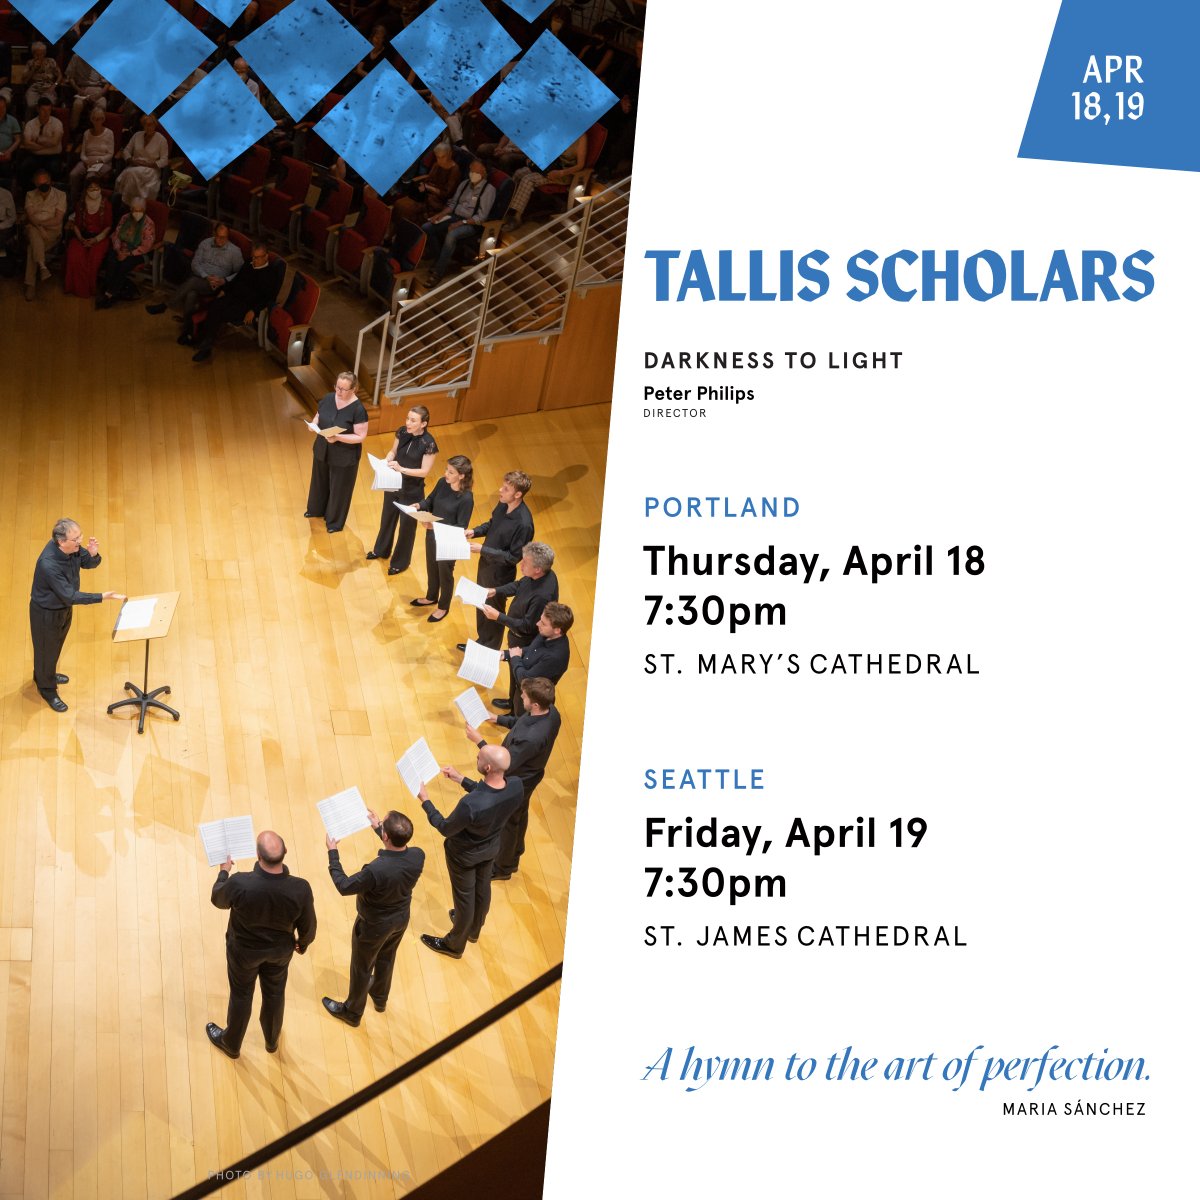 Thursday in #Portland and Friday in #Seattle, Cappella Romana is excited to present “one of the UK’s greatest cultural exports”, the @TallisScholars! Limited tickets remain — so get yours today: cappellaromana.org/tallis